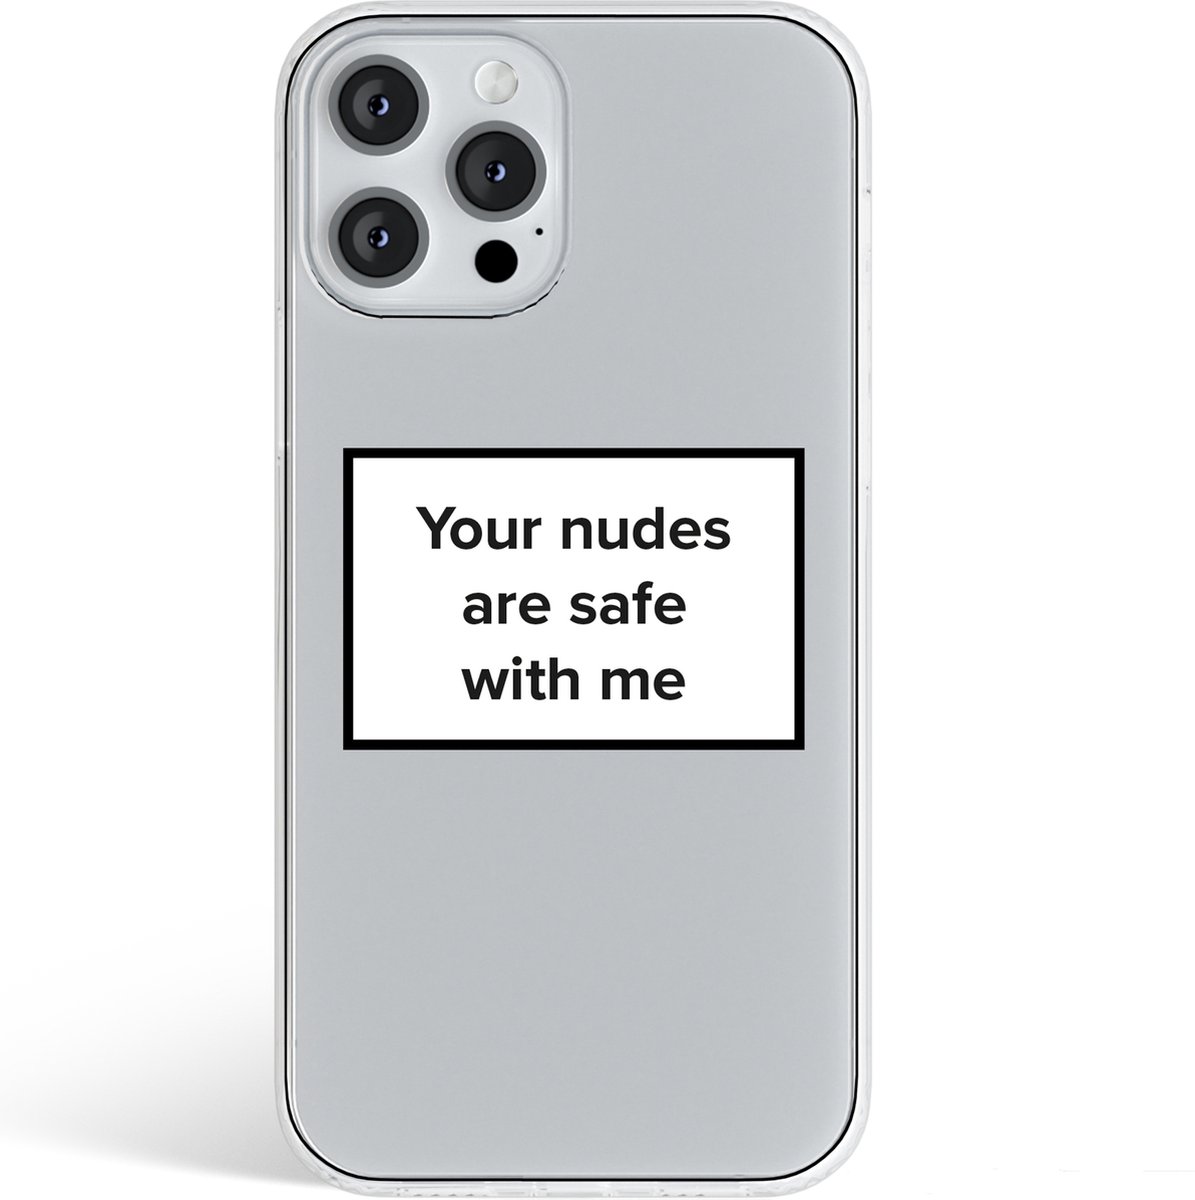 iPhone 13 hoesje - iPhone 13 case - Siliconen hoesje - Transparant - Case met Tekst - Your nudes are safe with me